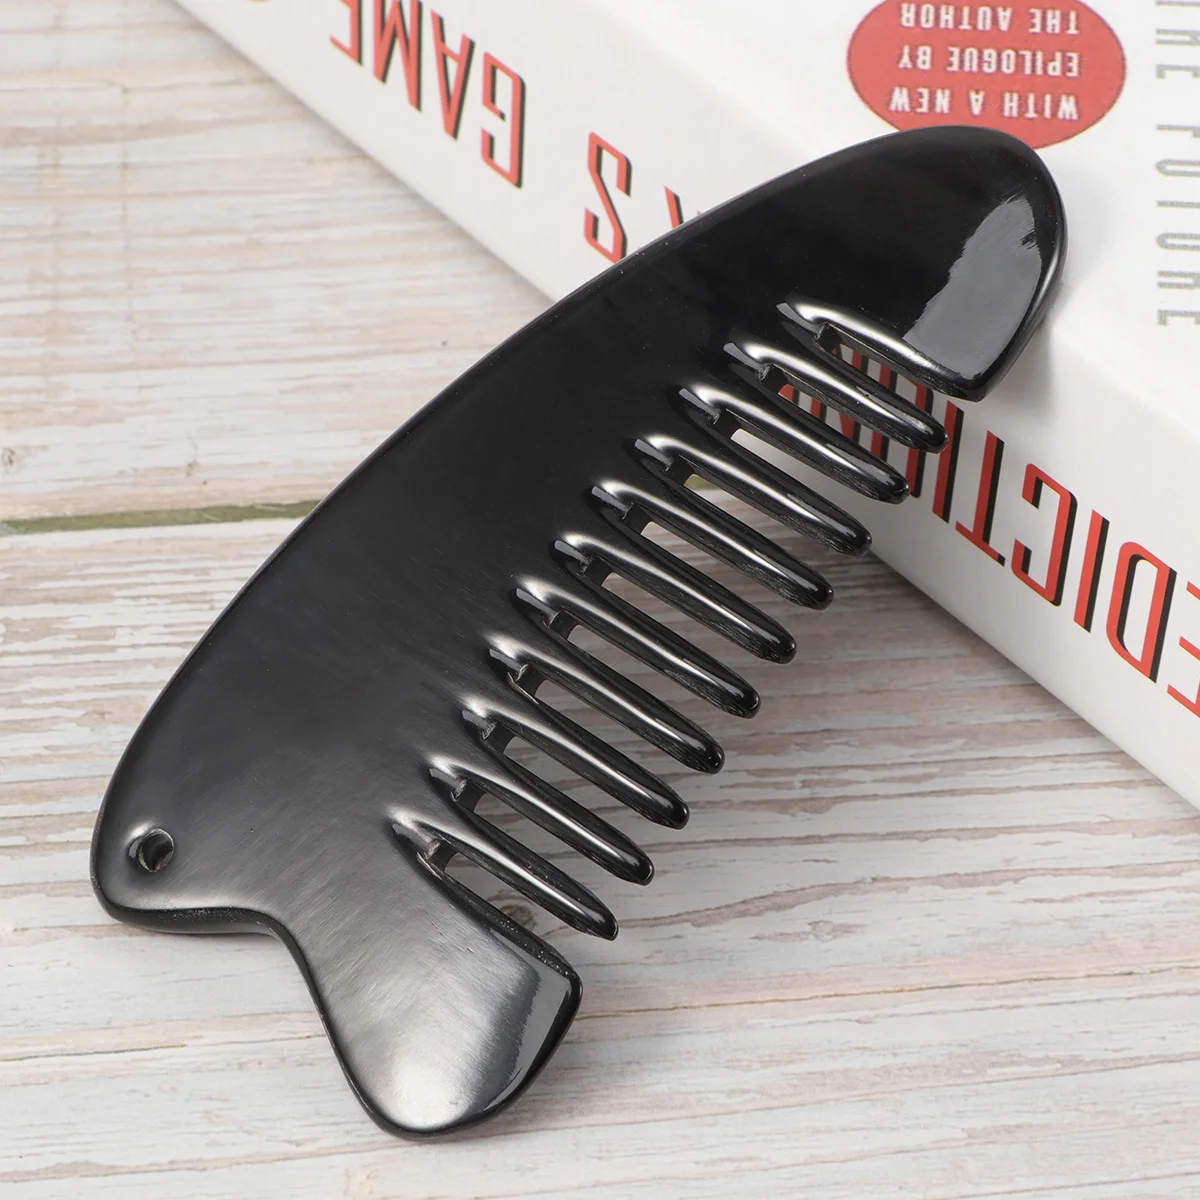 

Tool Board Scrapingcomb Tools Trigger Stone Point Scraper Hair Body Facial Face Chinese Traditional Massaging Jade Horn Ox Combs